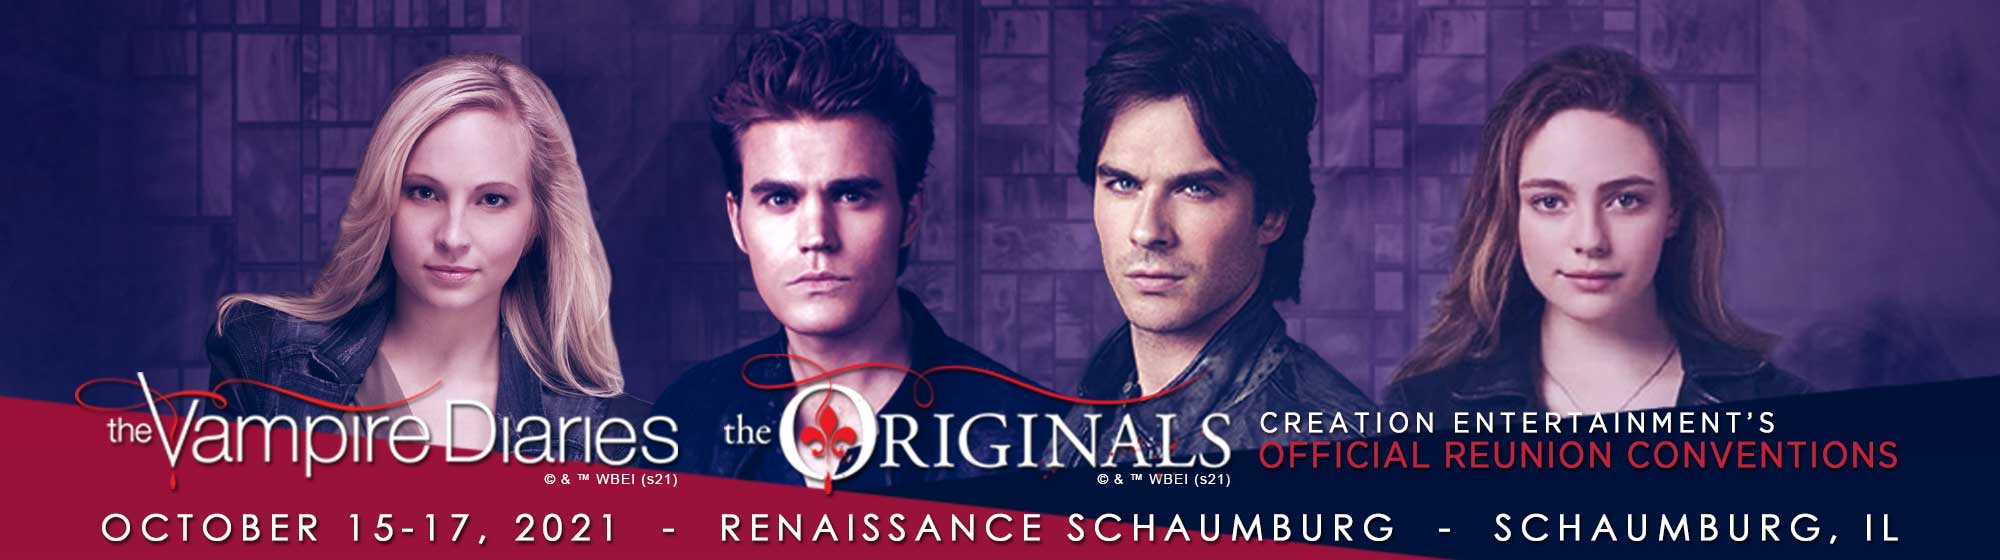 Creation Entertainment's The Vampire Diaries/The Originals Official